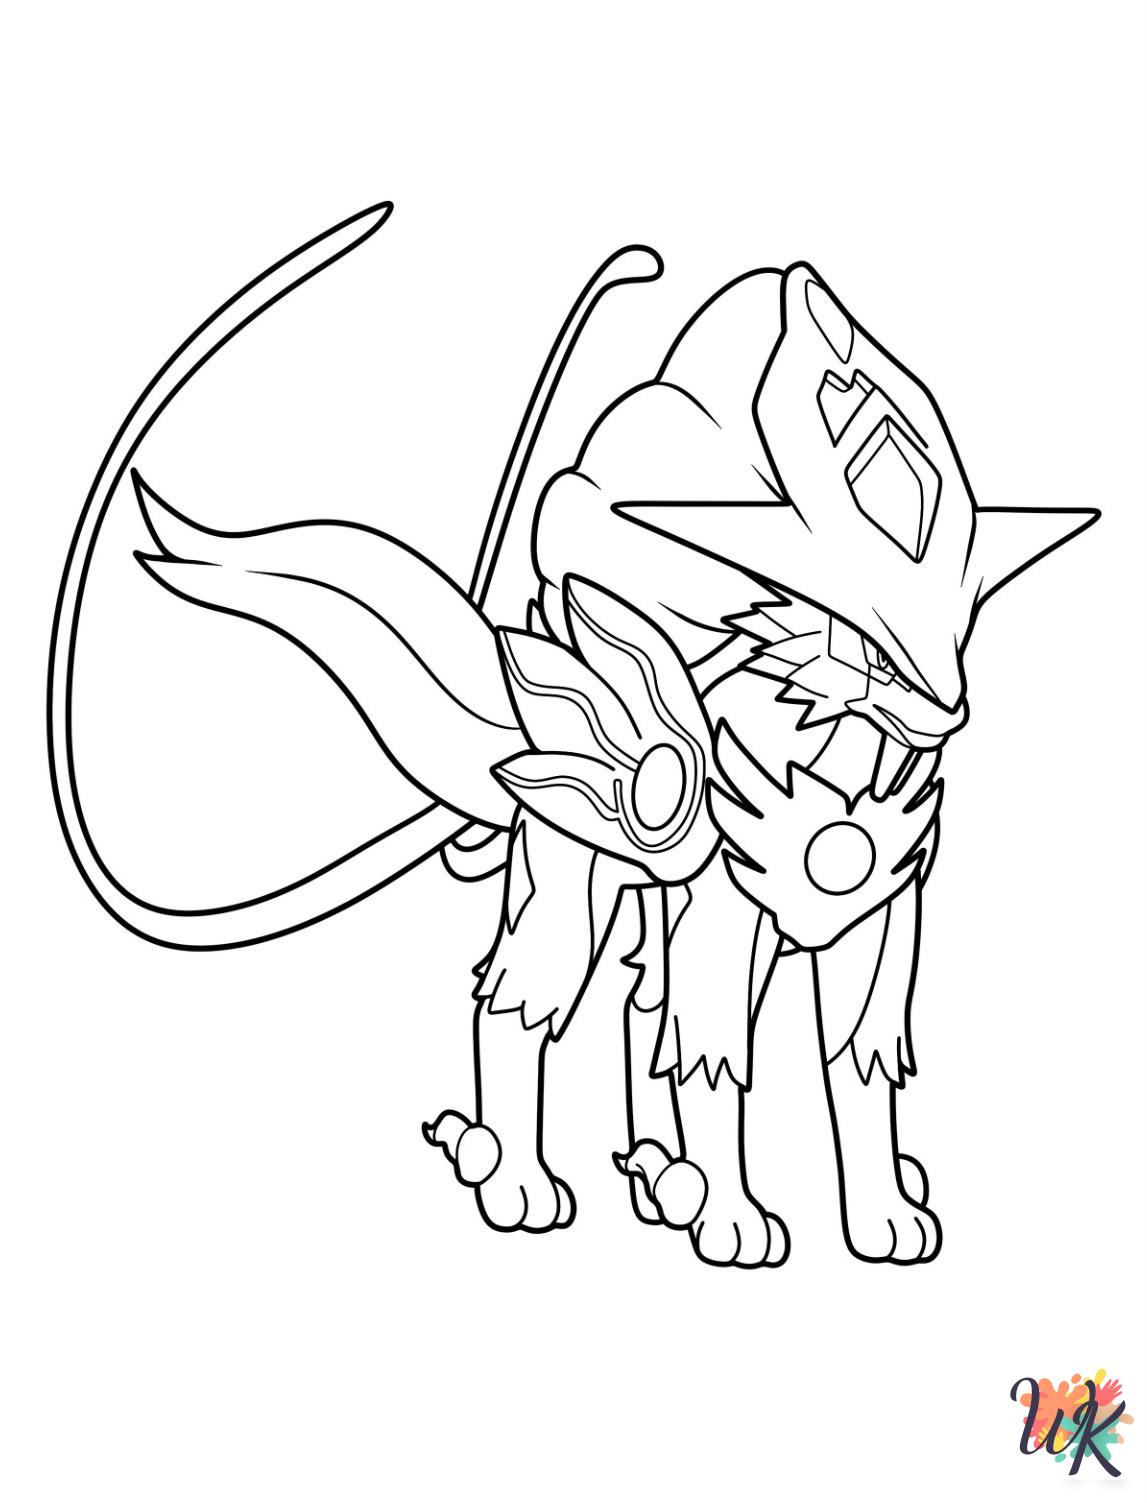 free Legendary Pokemon coloring pages for adults